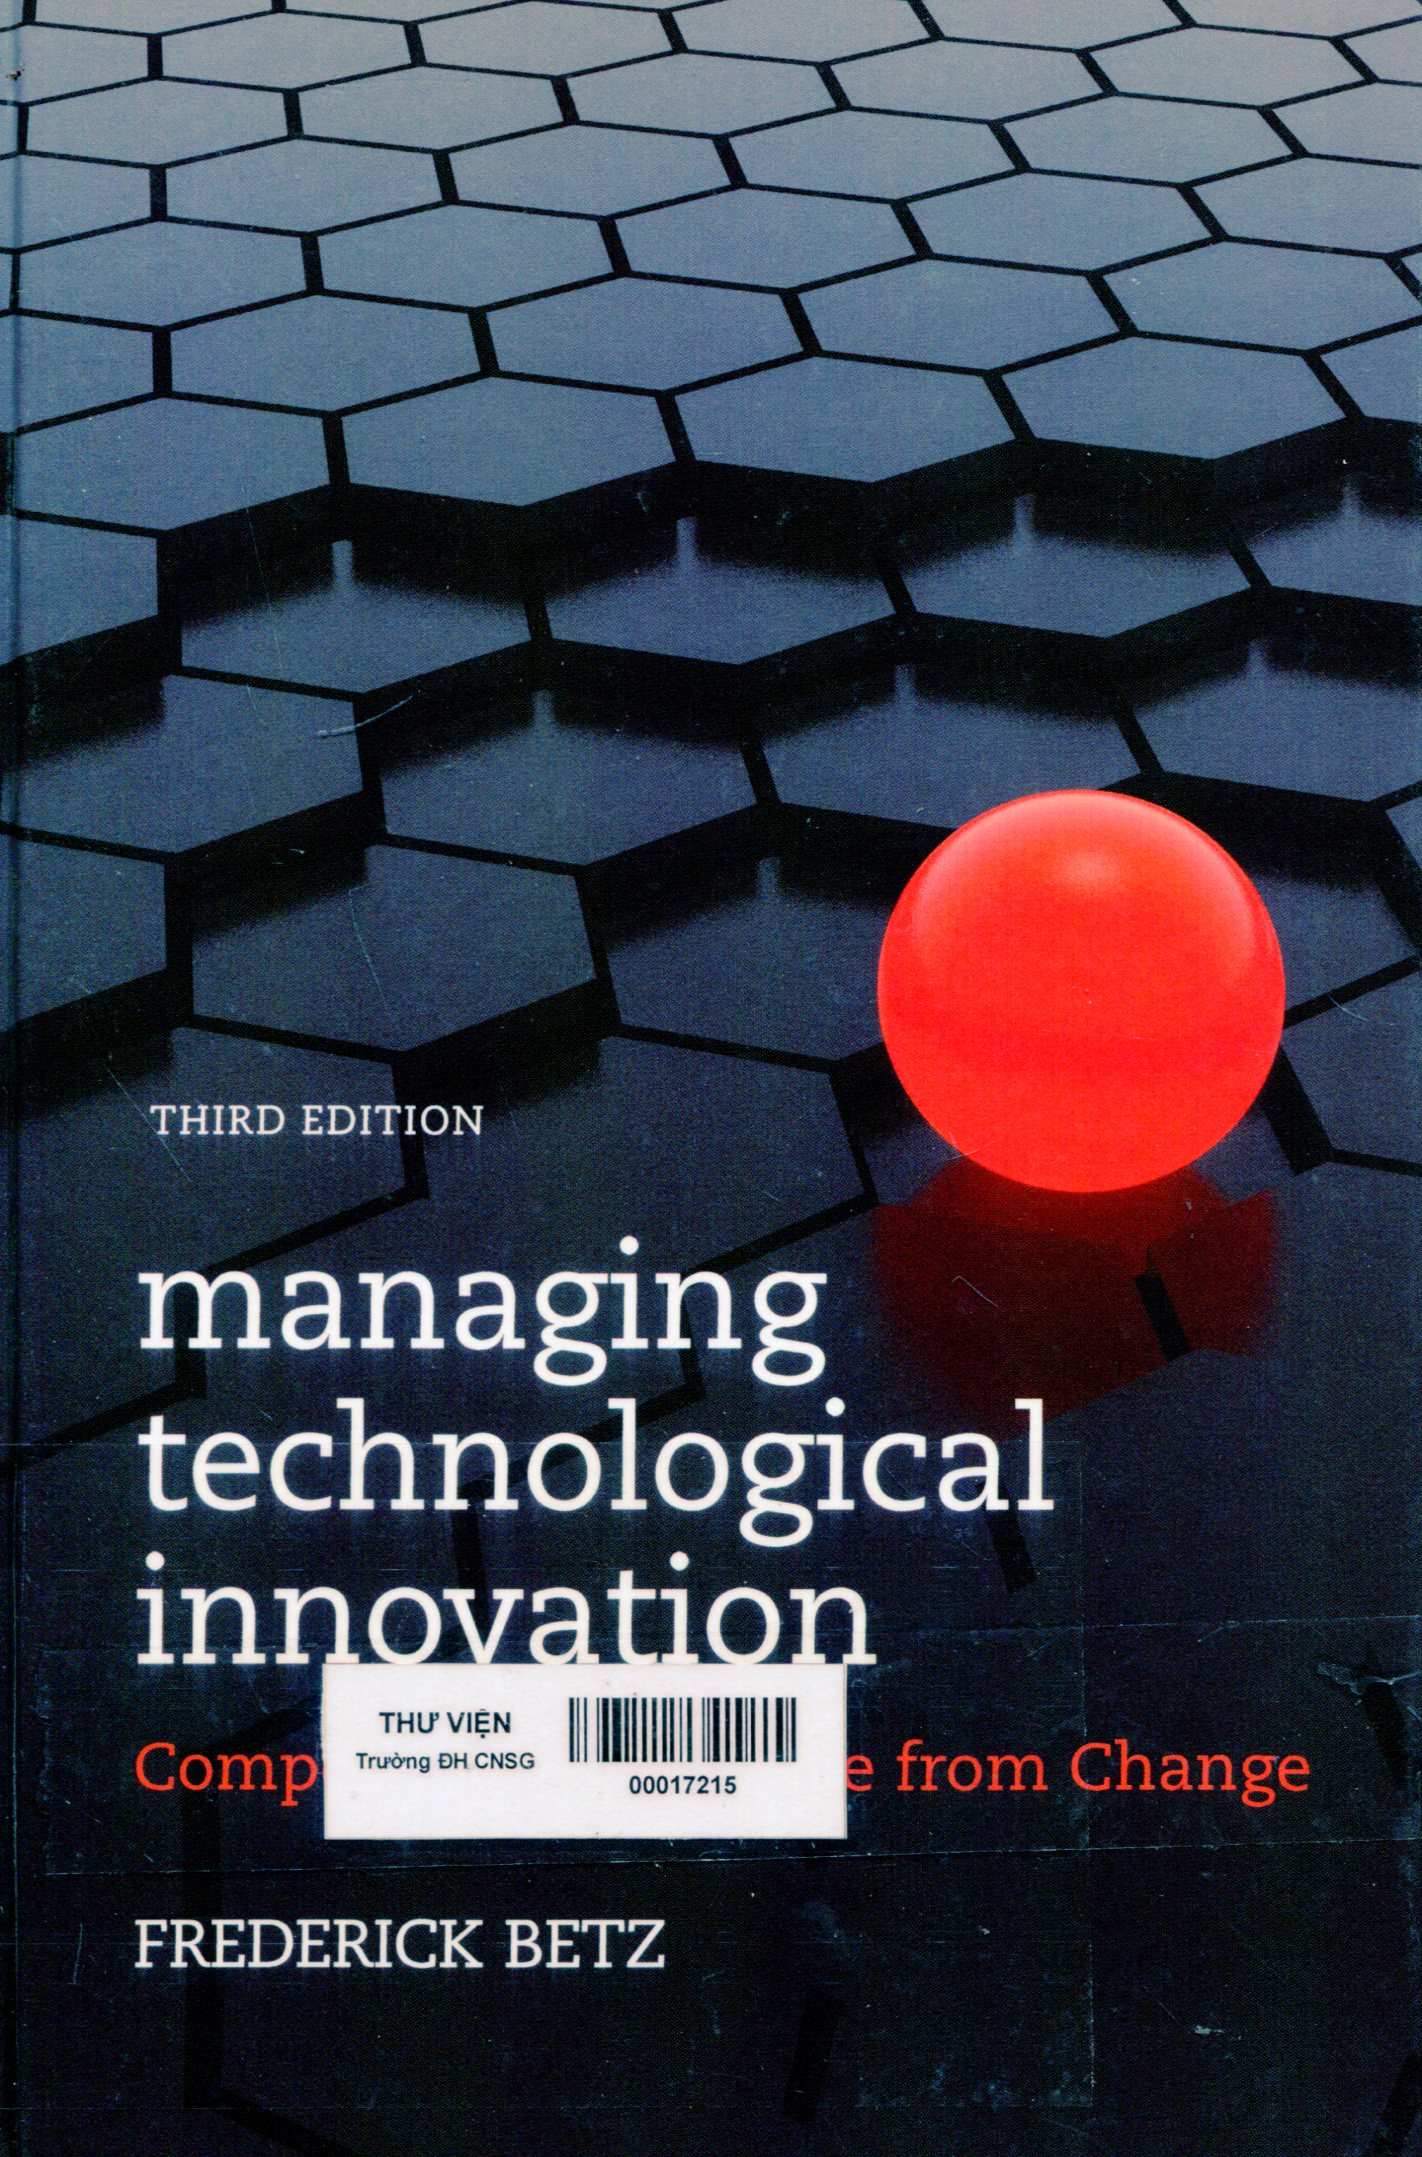 Managing technological innovation : competitive advantage from change